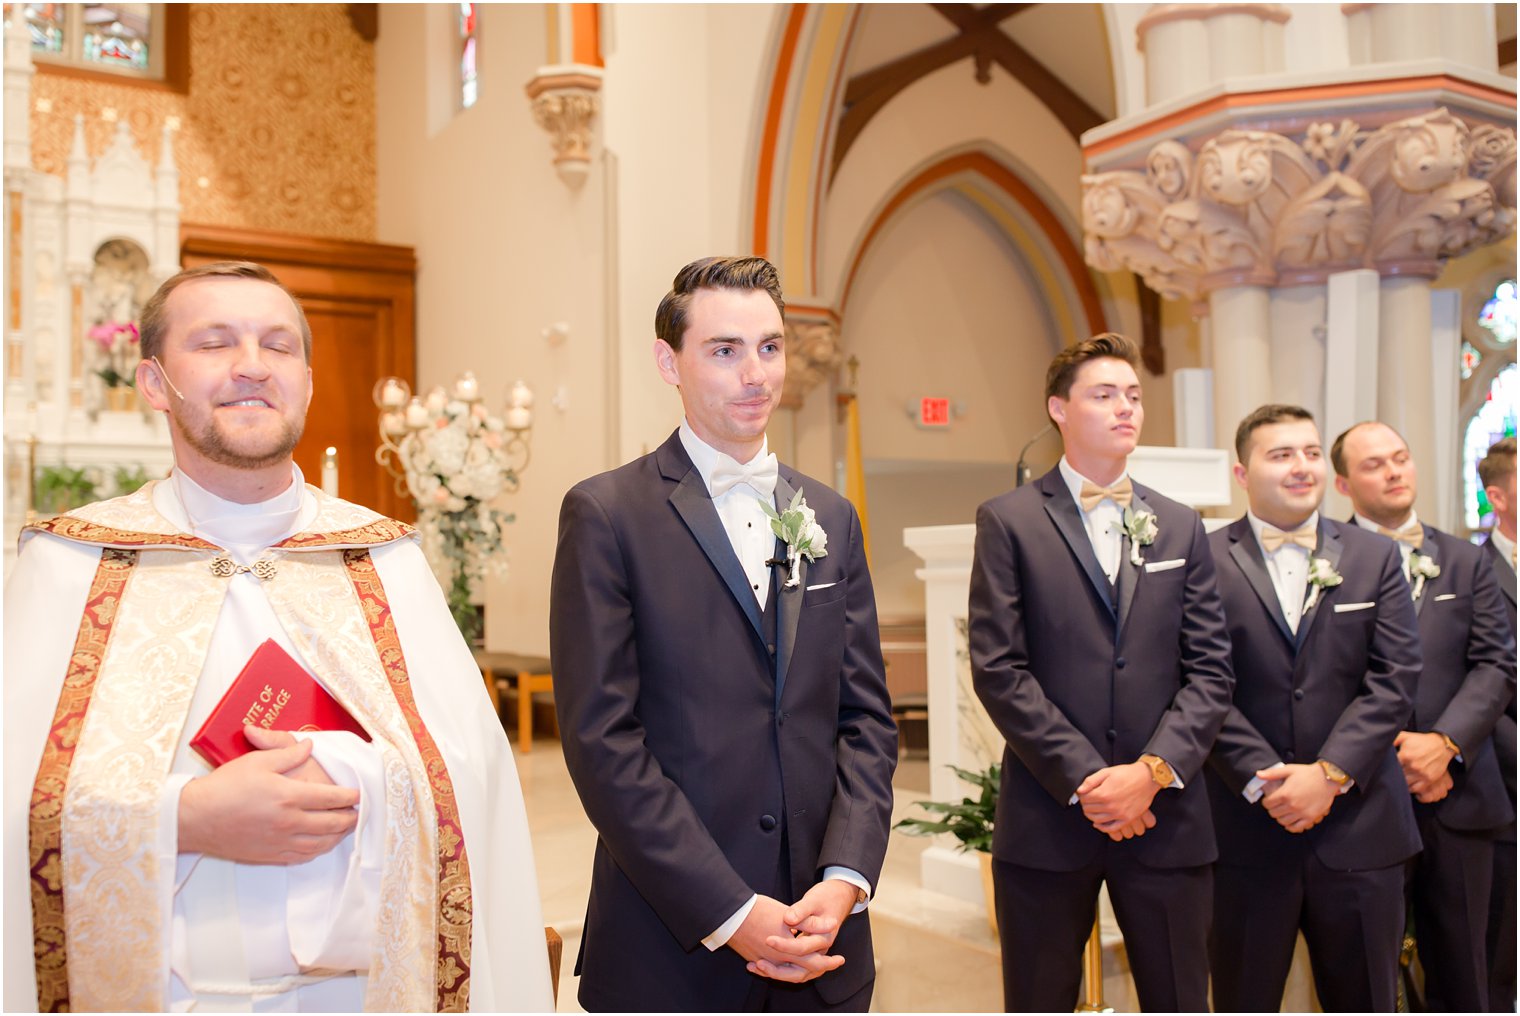 groom waits for bride to come down aisle at NJ church ceremony photographed by Idalia Photography